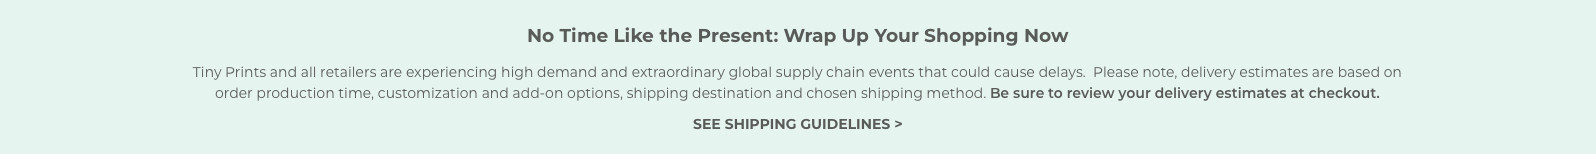 See Shipping Guidelines